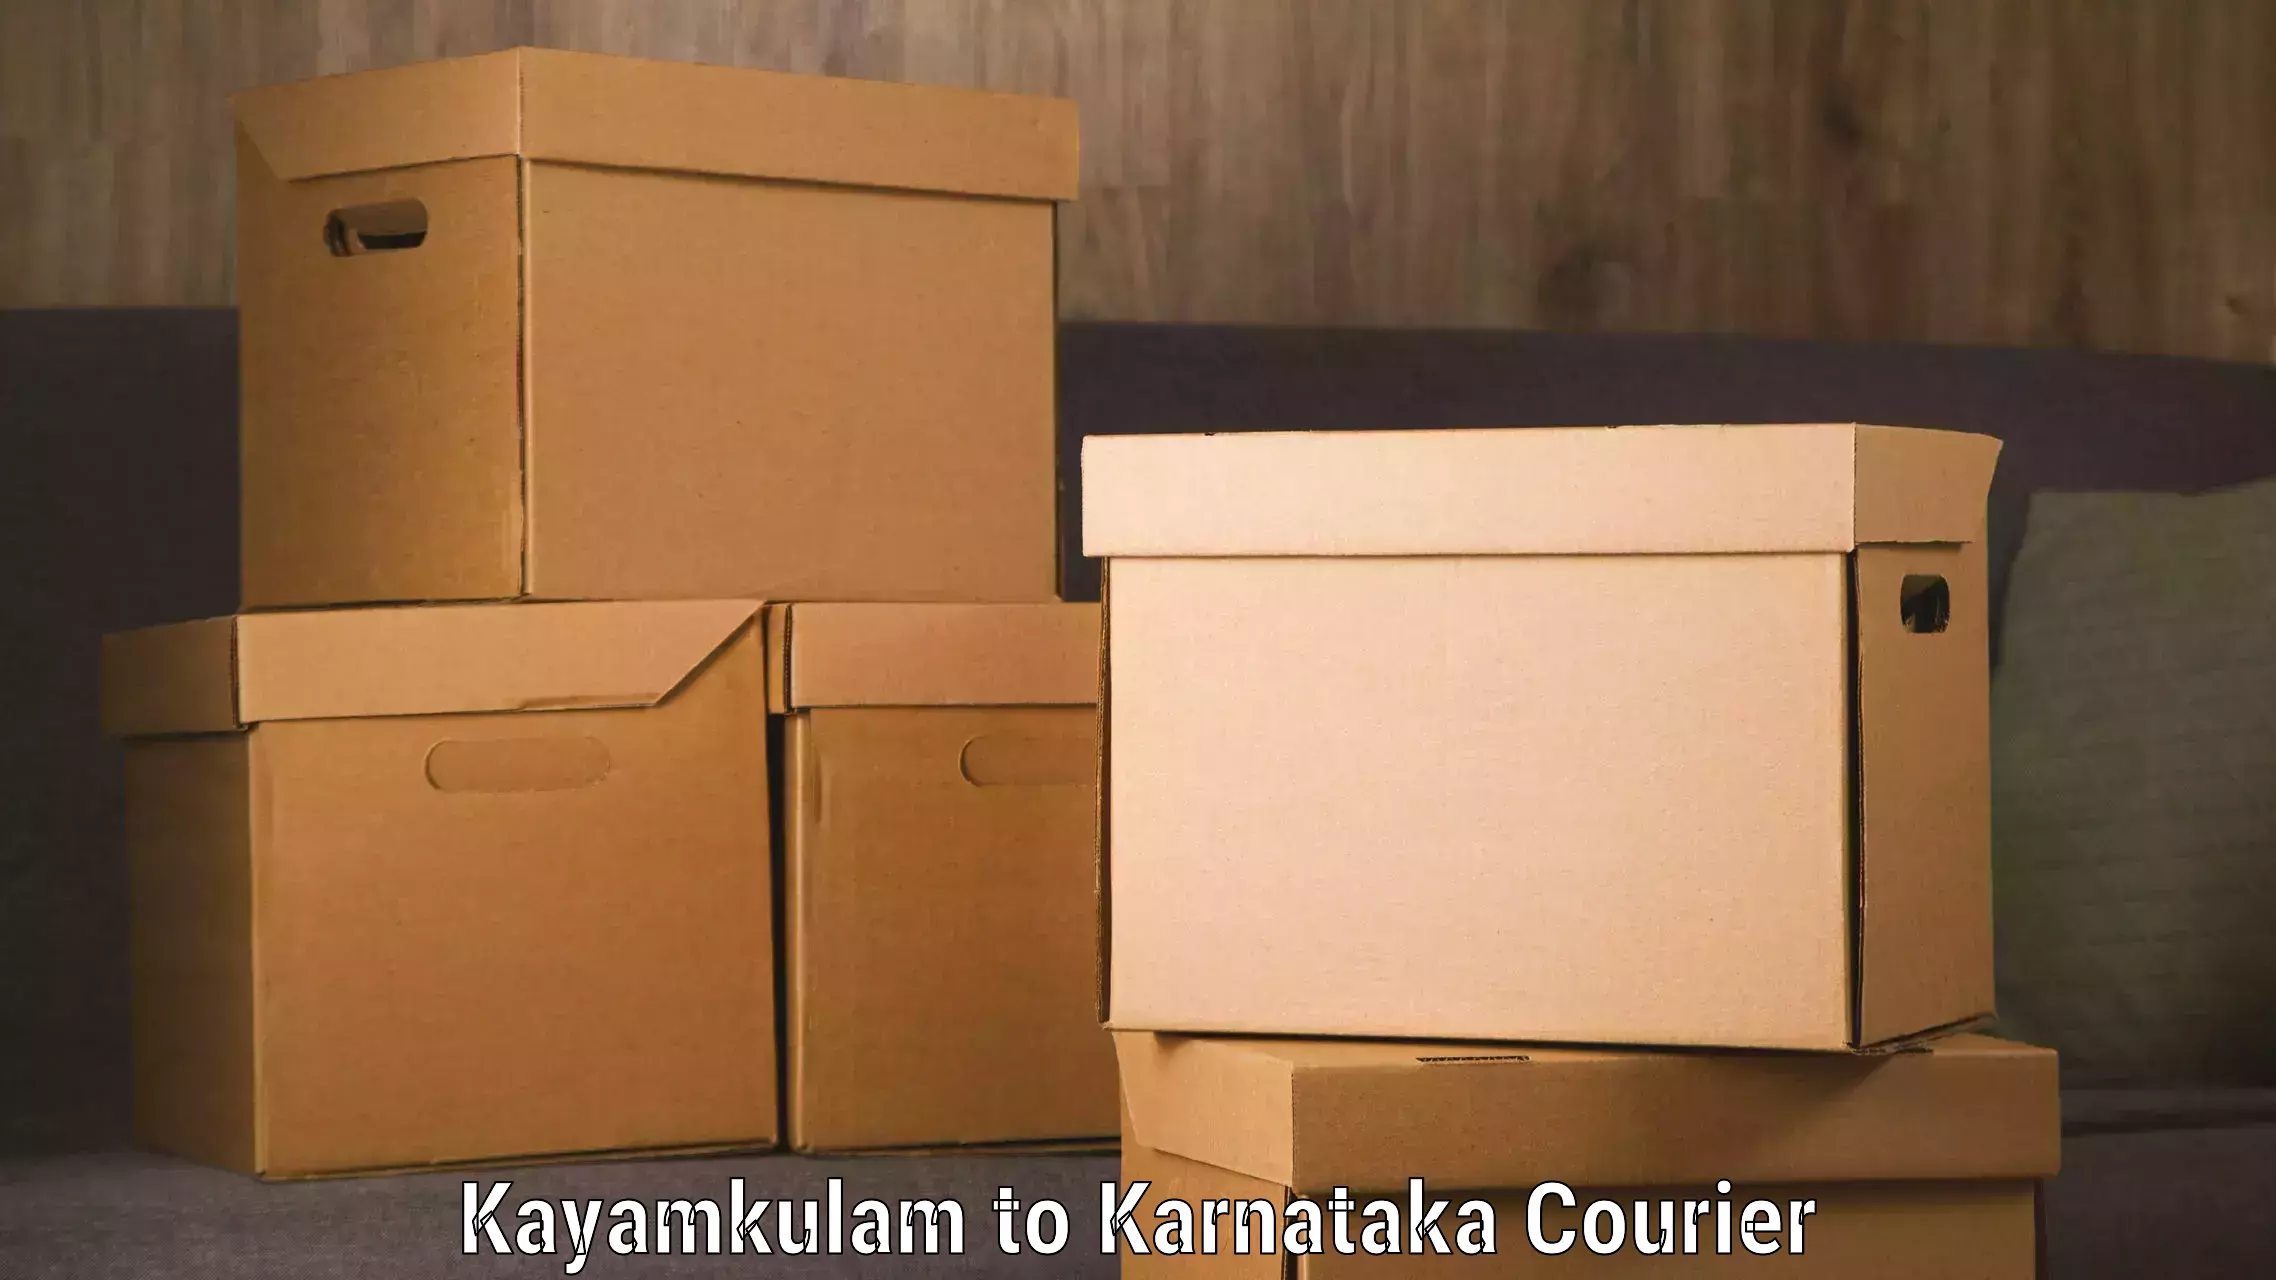 Efficient package consolidation Kayamkulam to Manipal